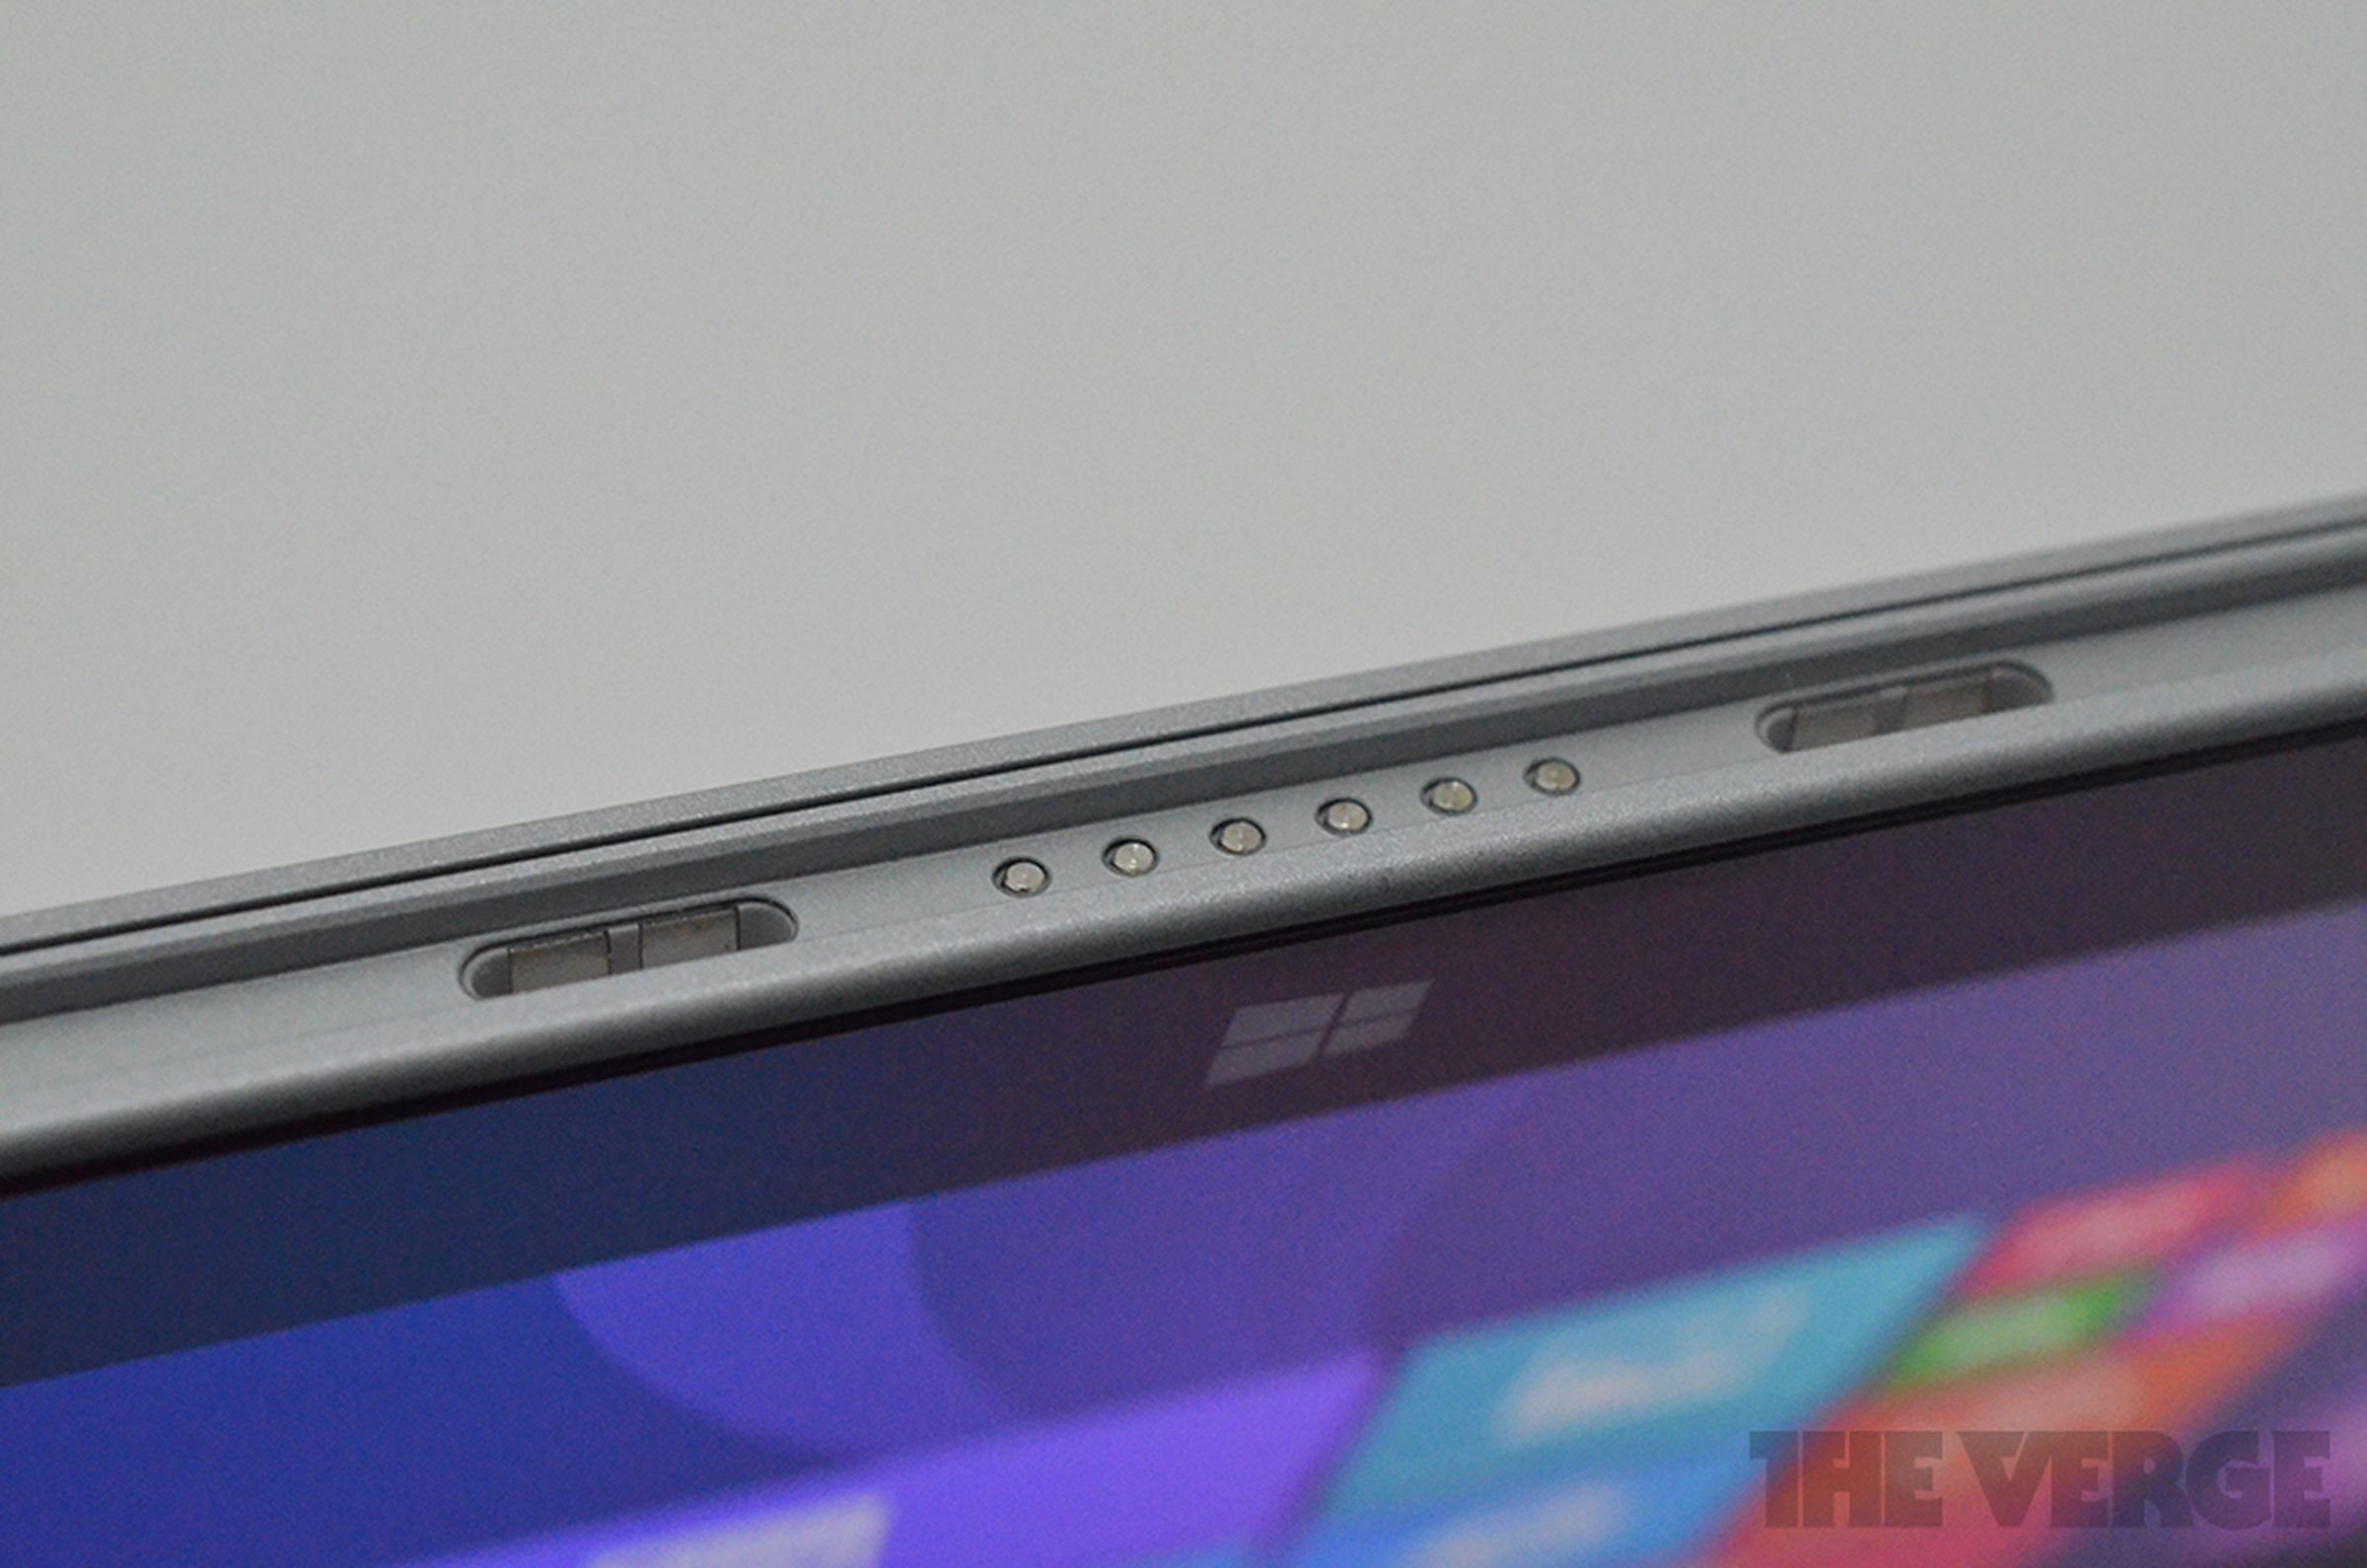 Surface 2 hands-on photos